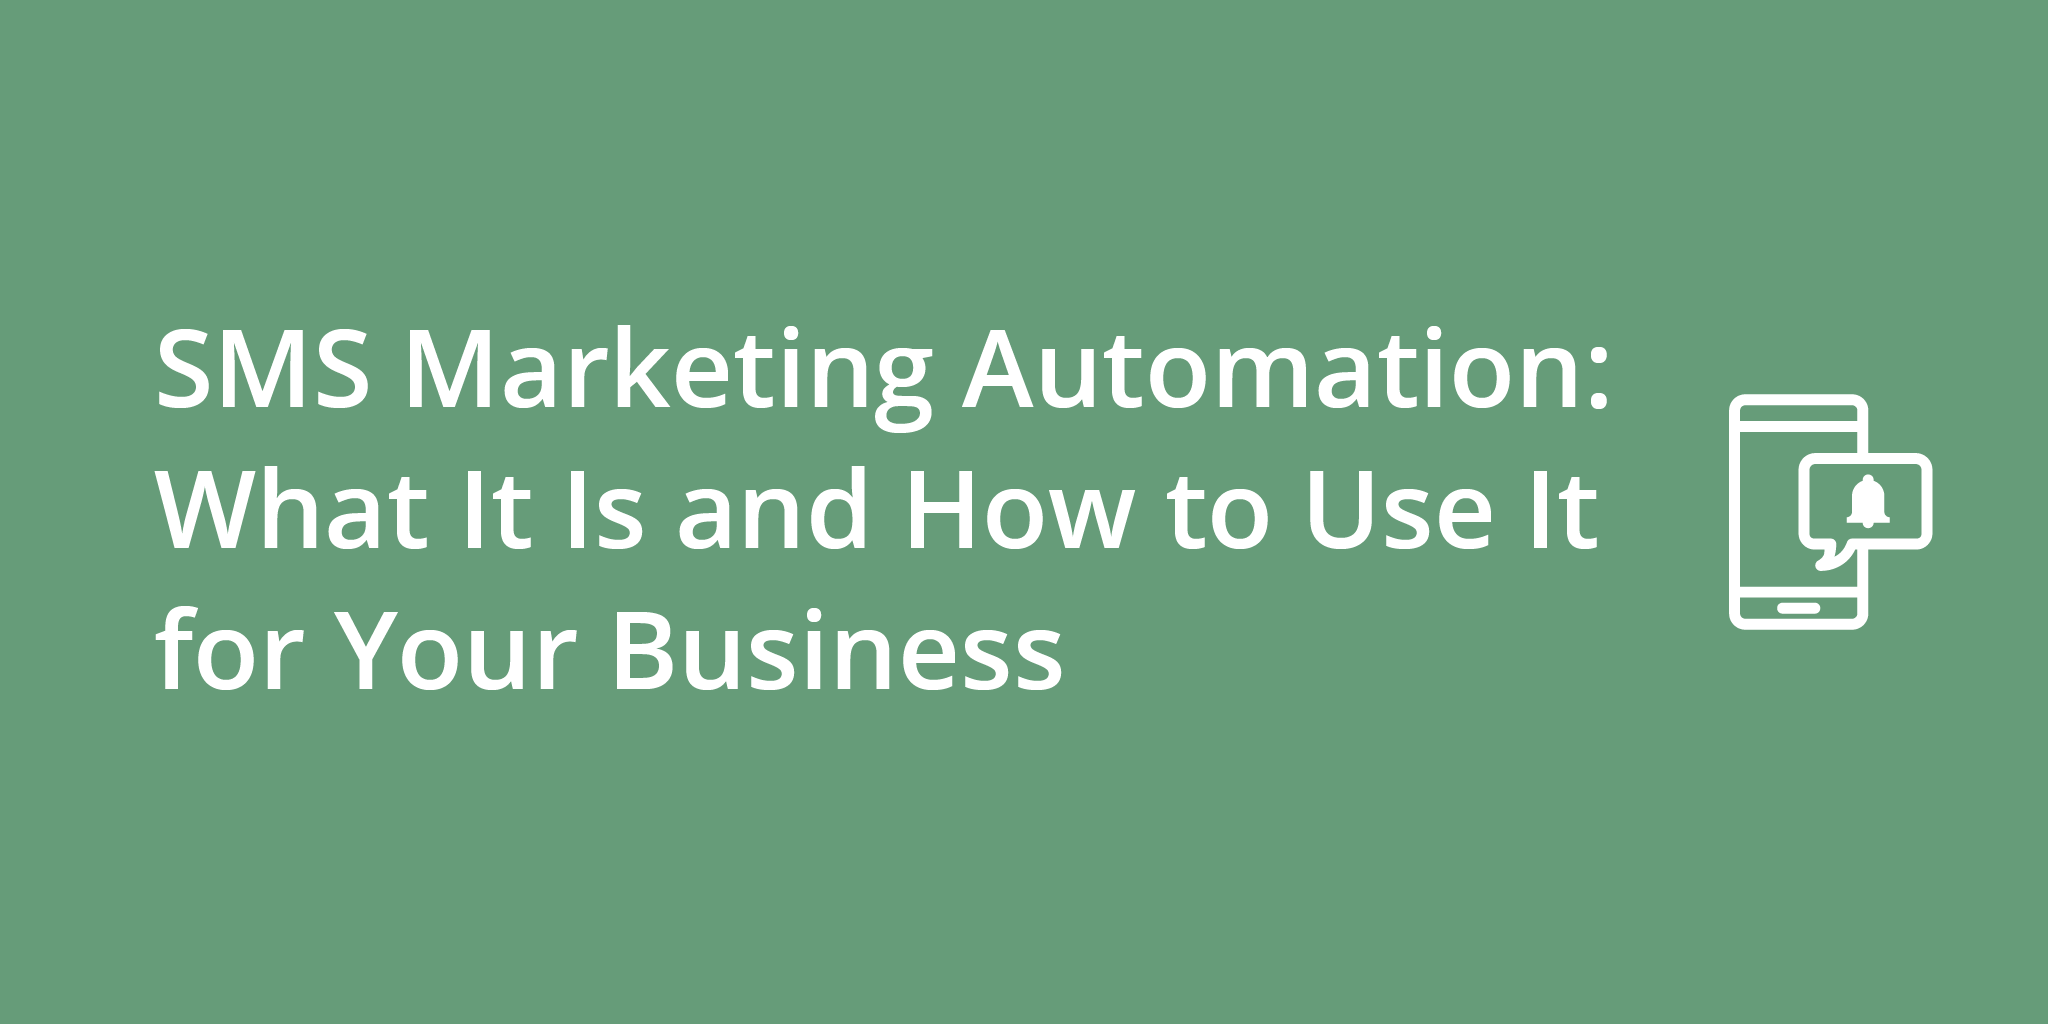 SMS Marketing Automation: What It Is and How to Use It for Your Business | Telephones for business